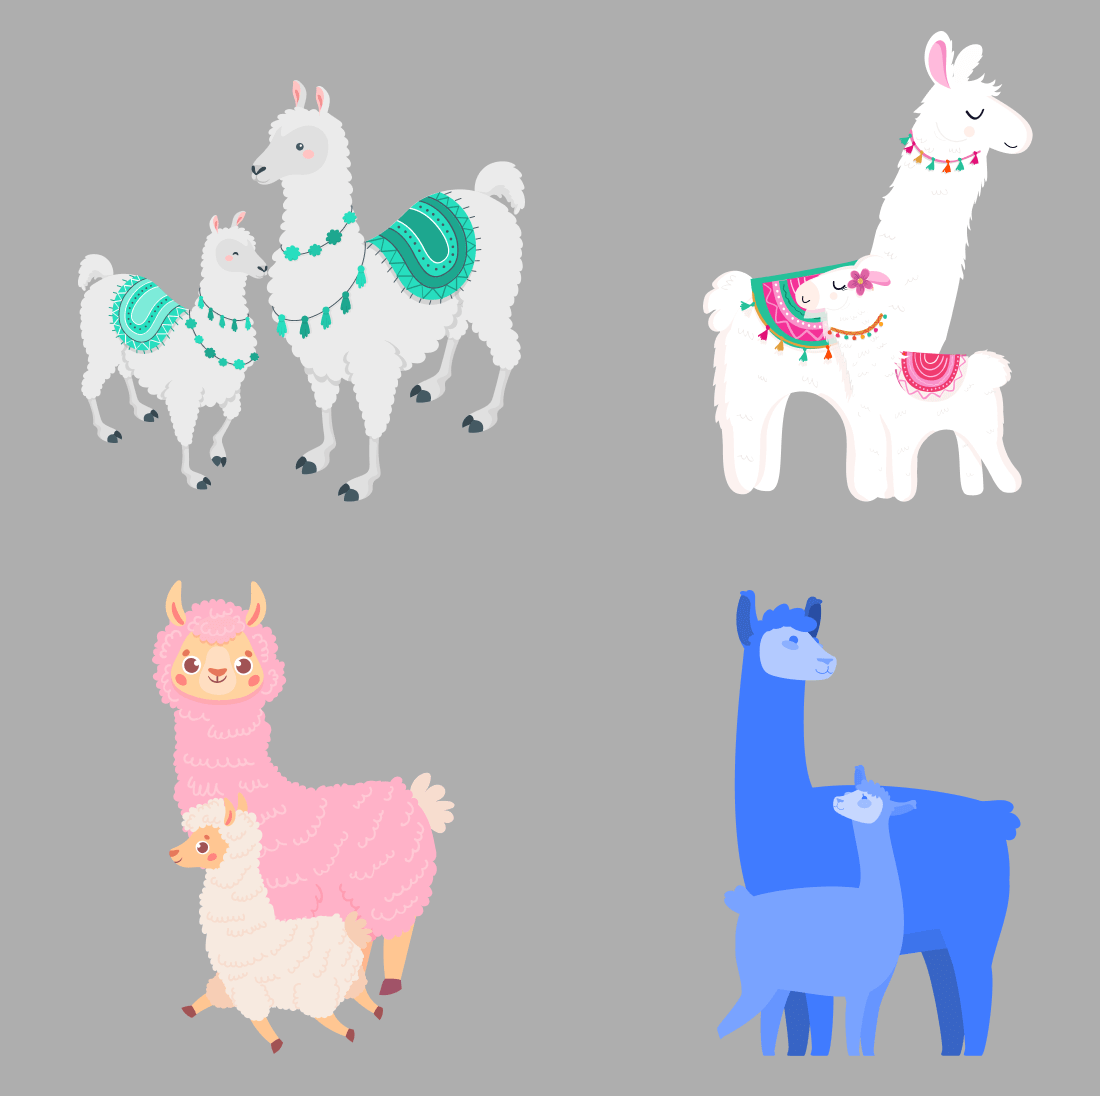 Group of llamas and alpacas in different colors.